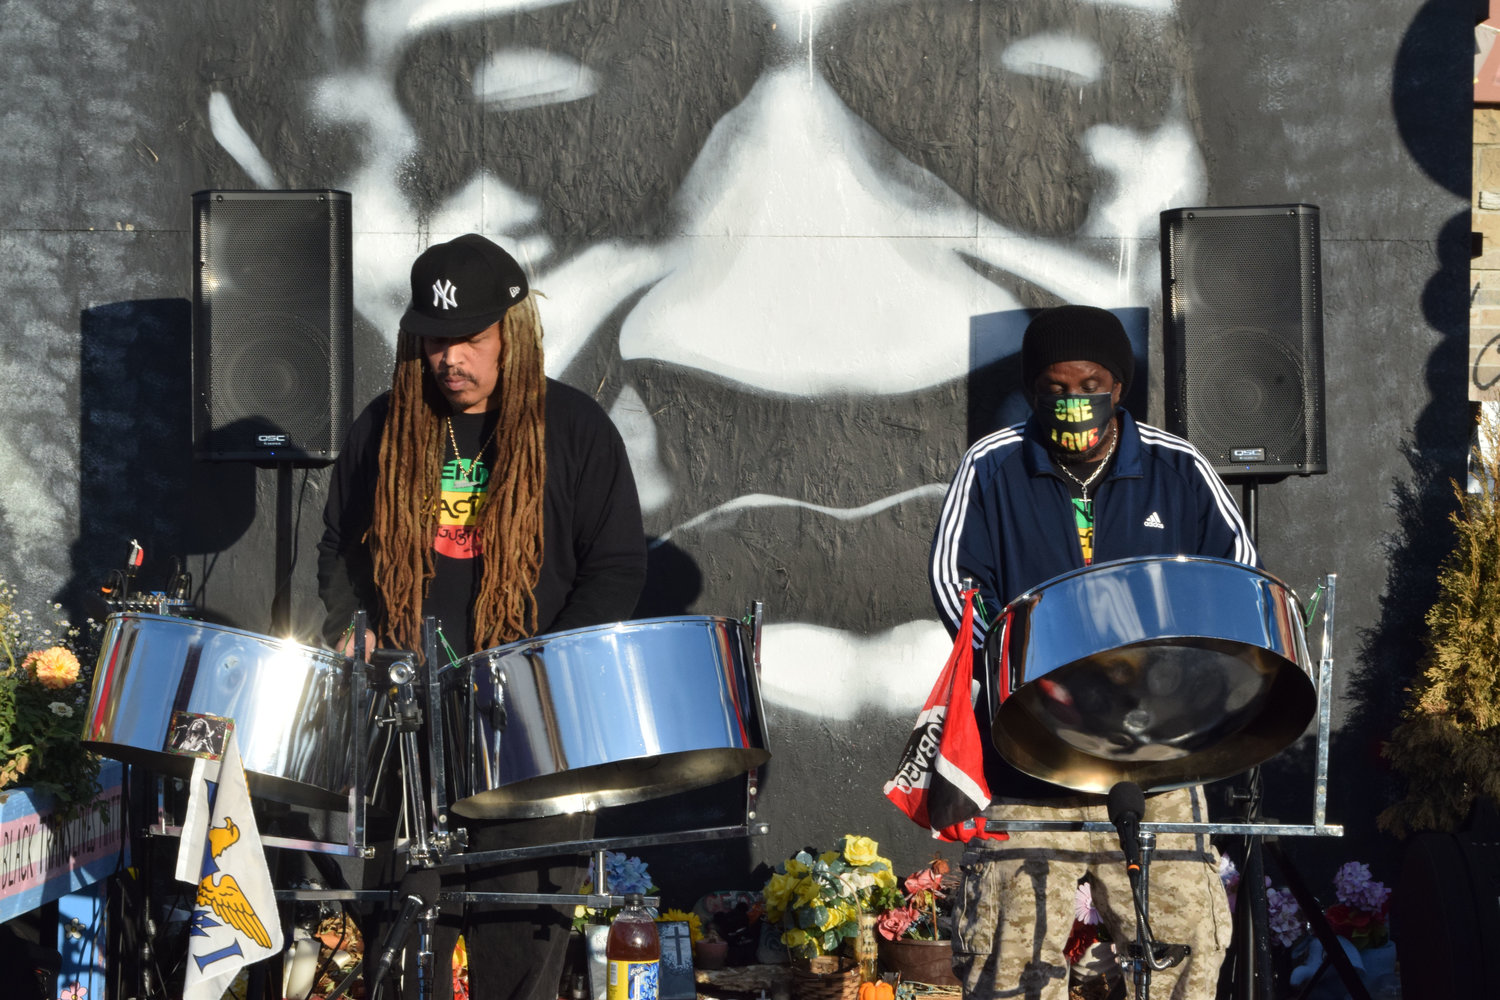 Pan Dimensions plays steel drum “sounds from the Caribbean” at the George Floyd memorial at a celebration of his life on what would have been George Floyd’s 48th birthday.